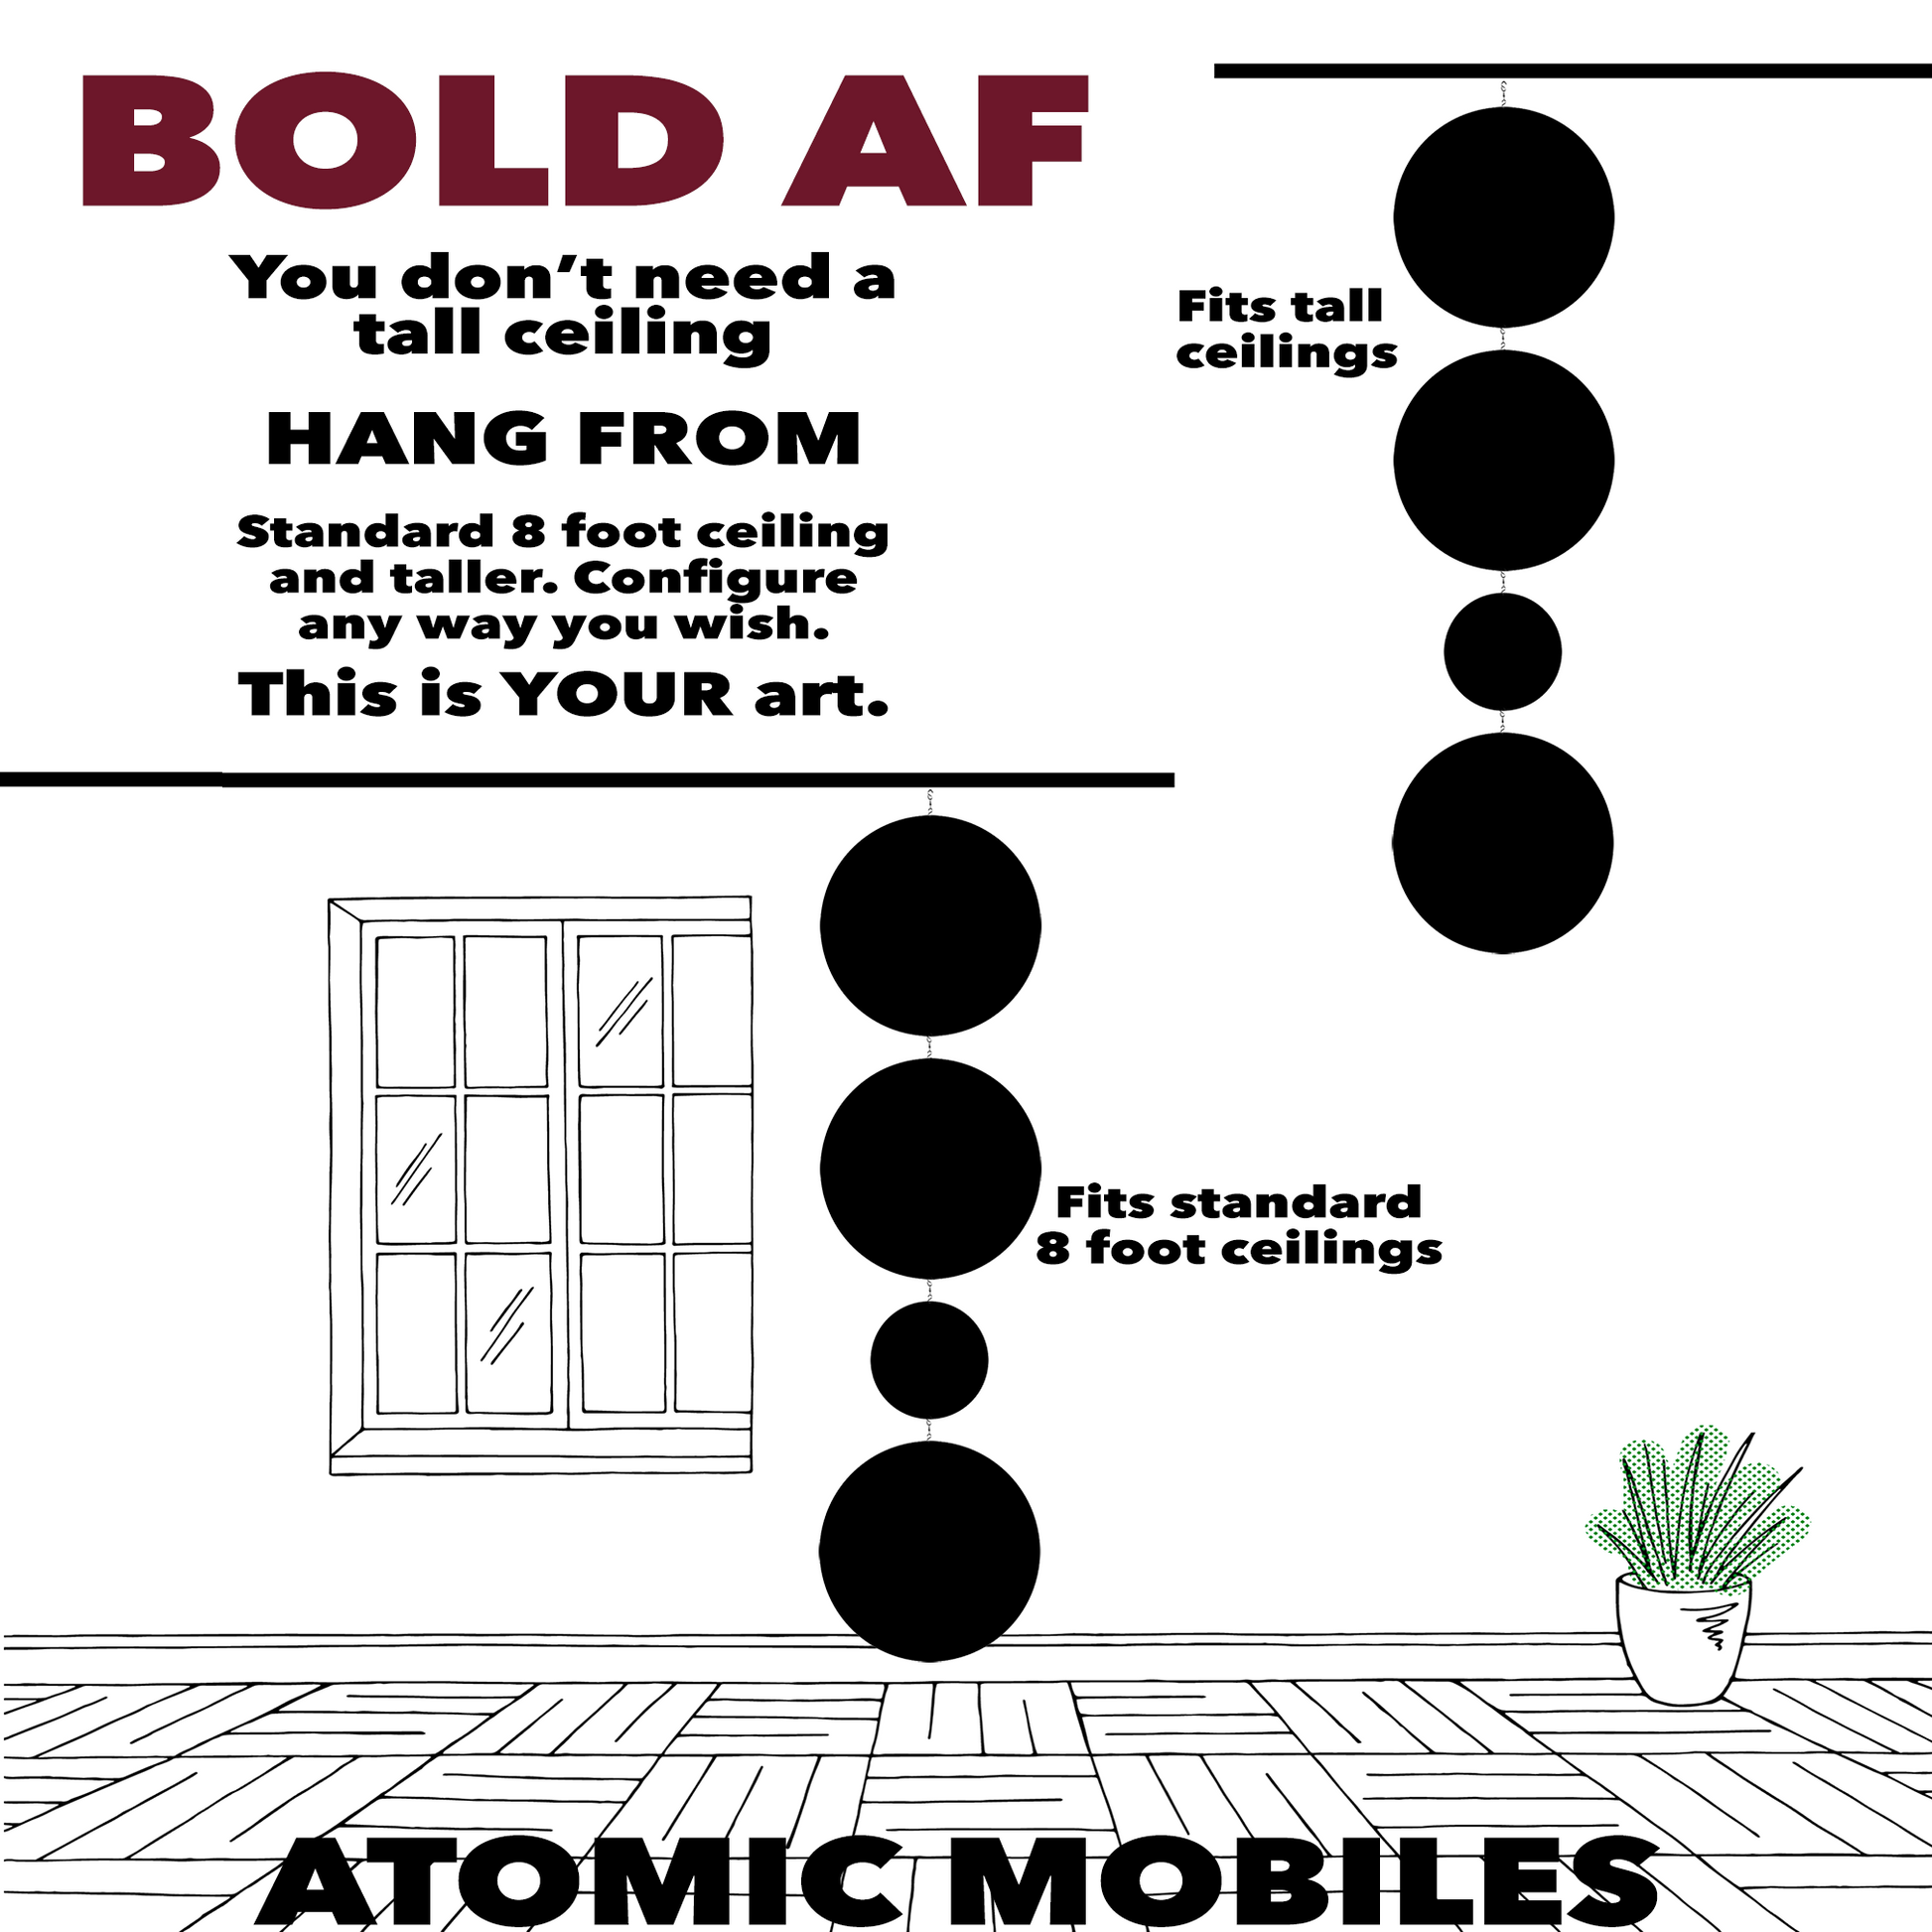 Size graphic for BOLD AF 92 inch massive hanging art mobile by AtomicMobiles.com - this mobile can hang from a standard 8 foot ceiling or taller